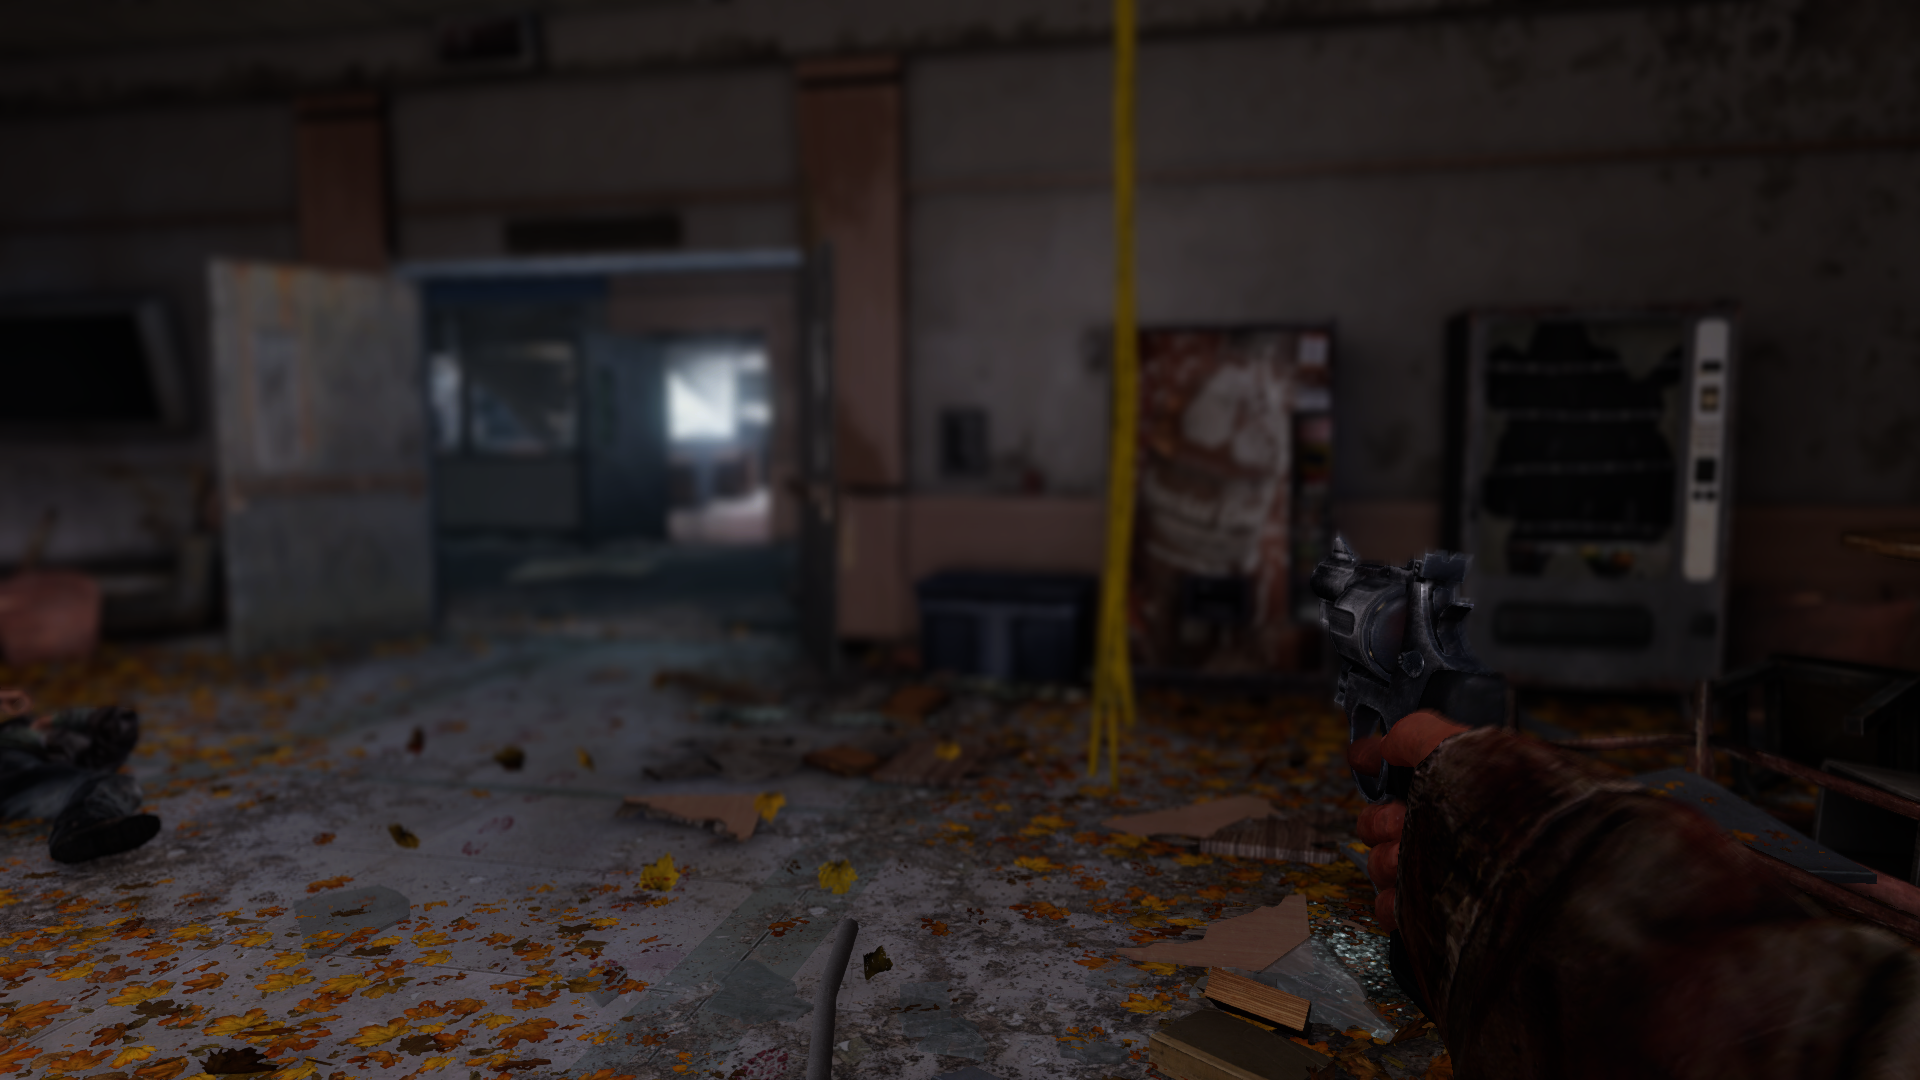 PS4: The Last of Us Remastered gets unofficial bug fixes and